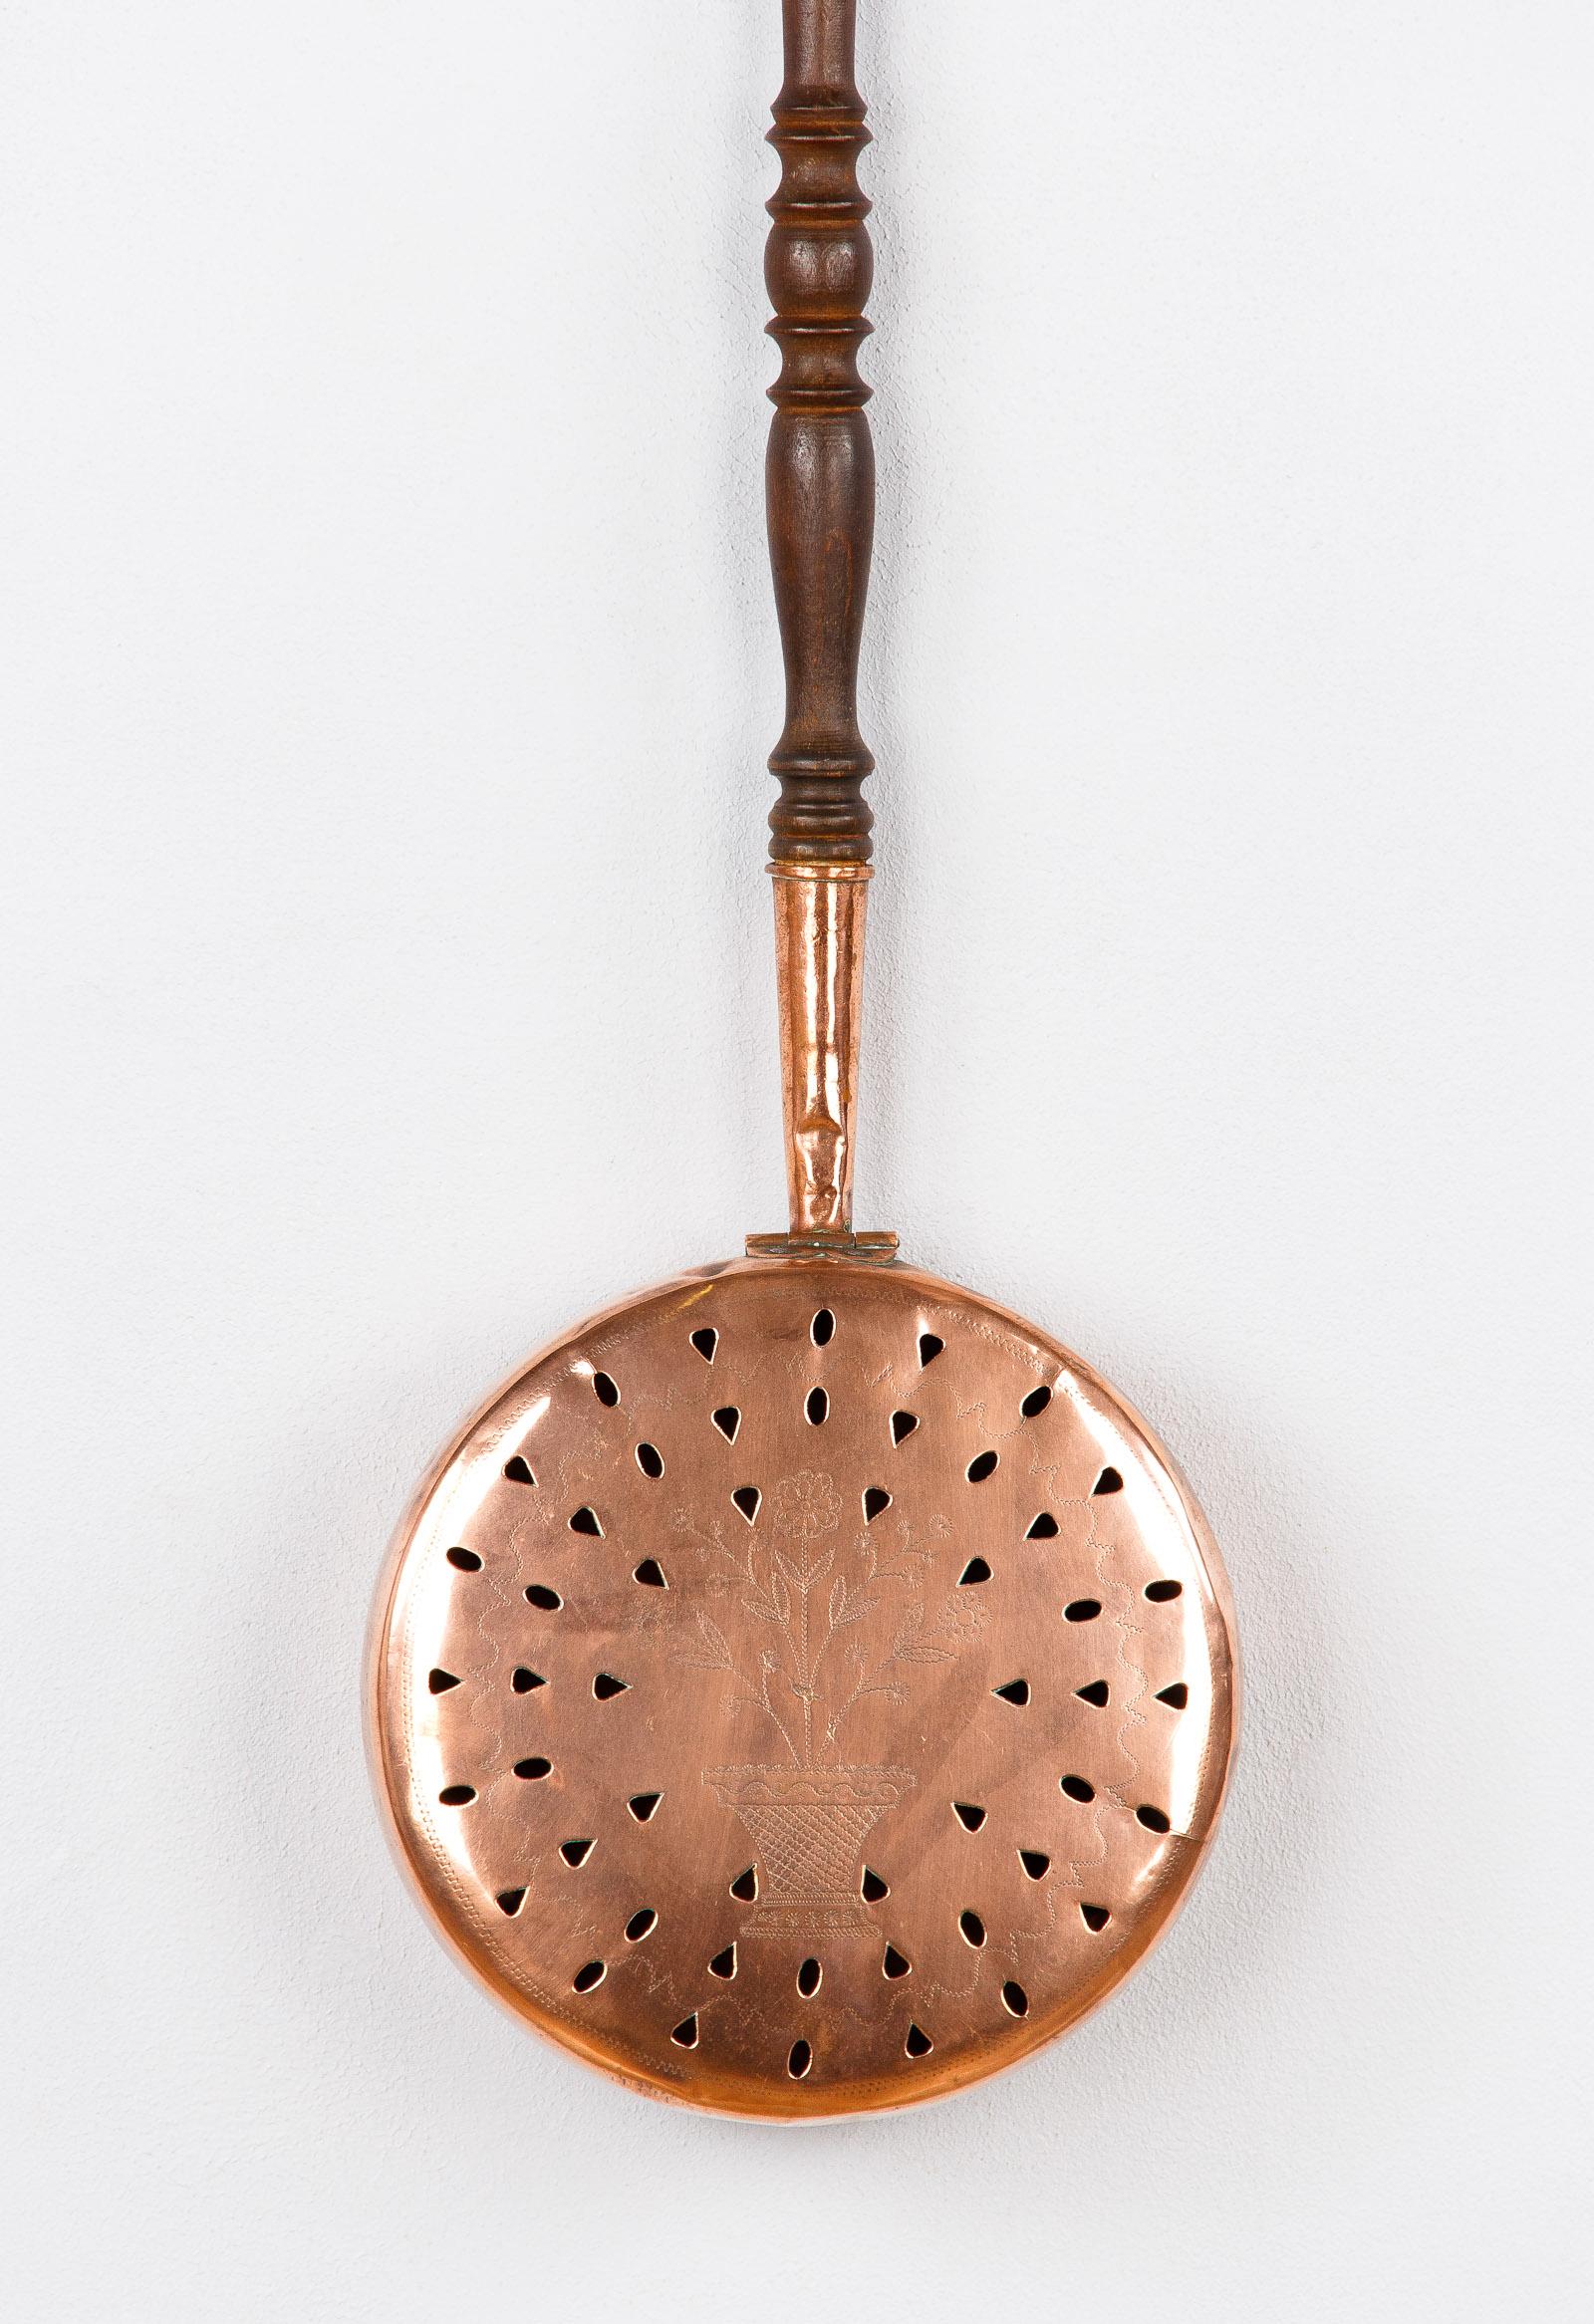 A copper bed warmer with a wooden handle from the Bresse region. The copper pan has a perforated lid and a sculpted motif of flowers in a pot.